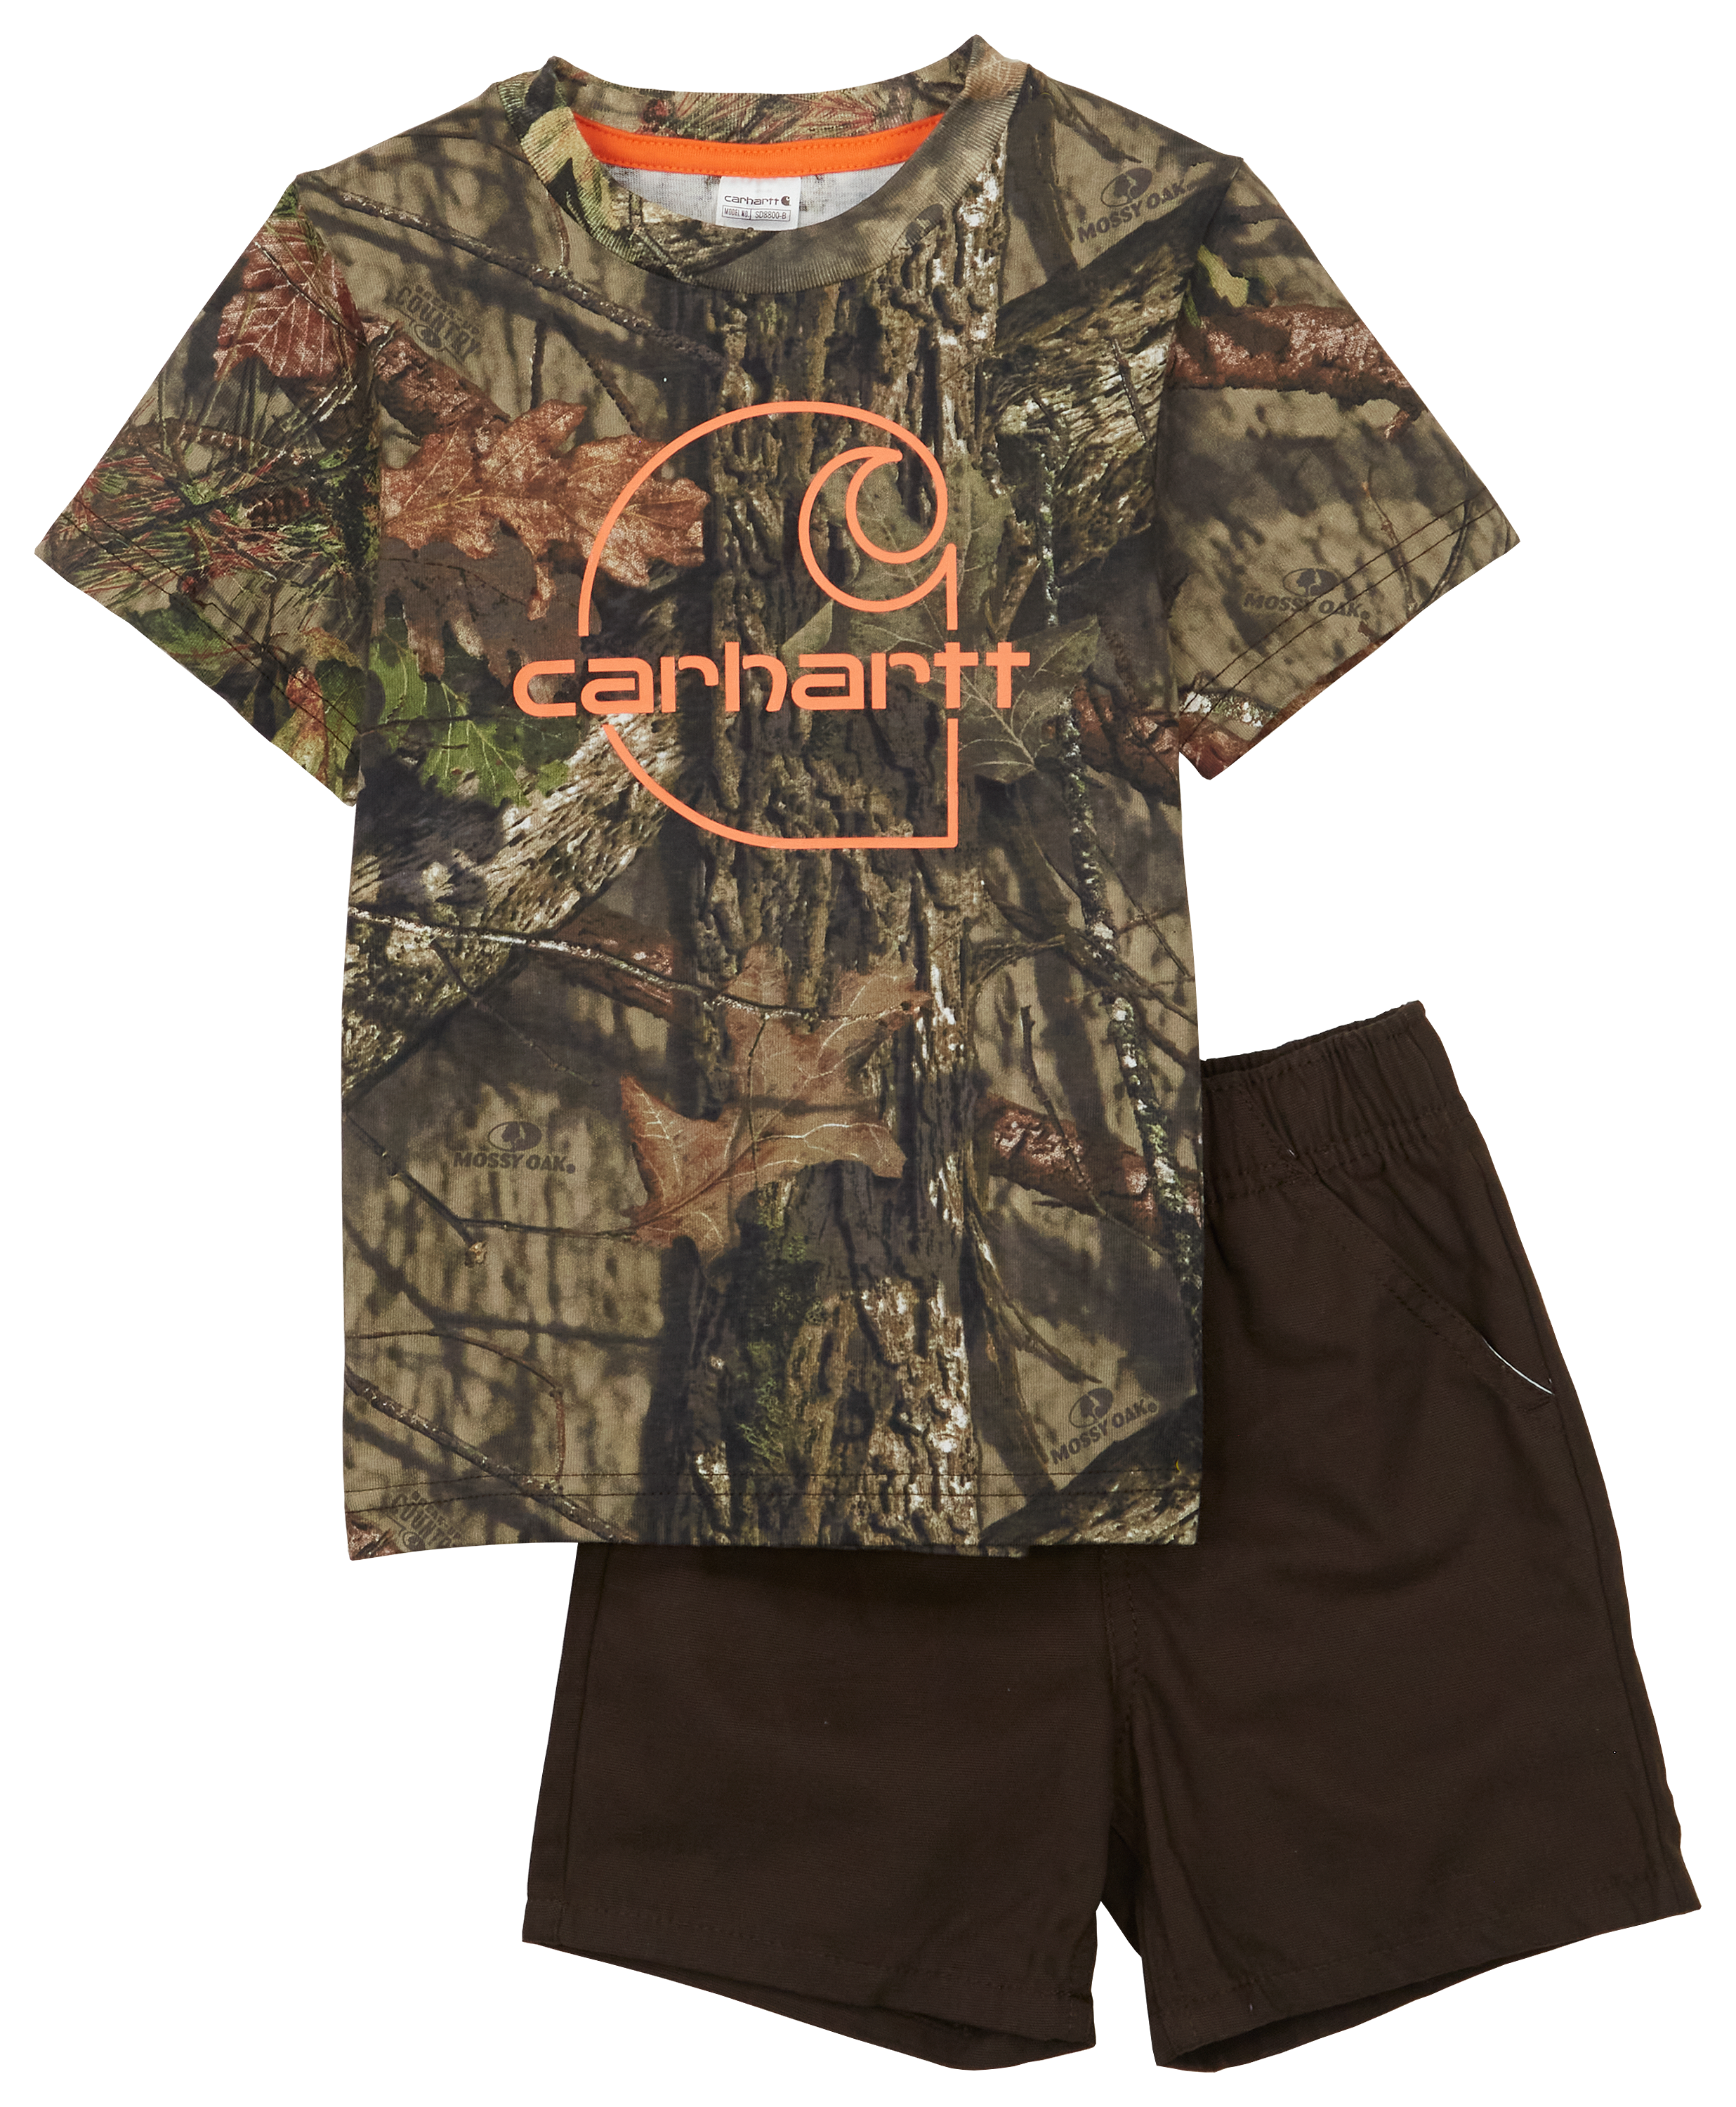 Carhartt Camo Short Sleeve T Shirt and Canvas Shorts Set for Toddler Boys Mossy Oak Break Up Country/Mustang Brown 4T